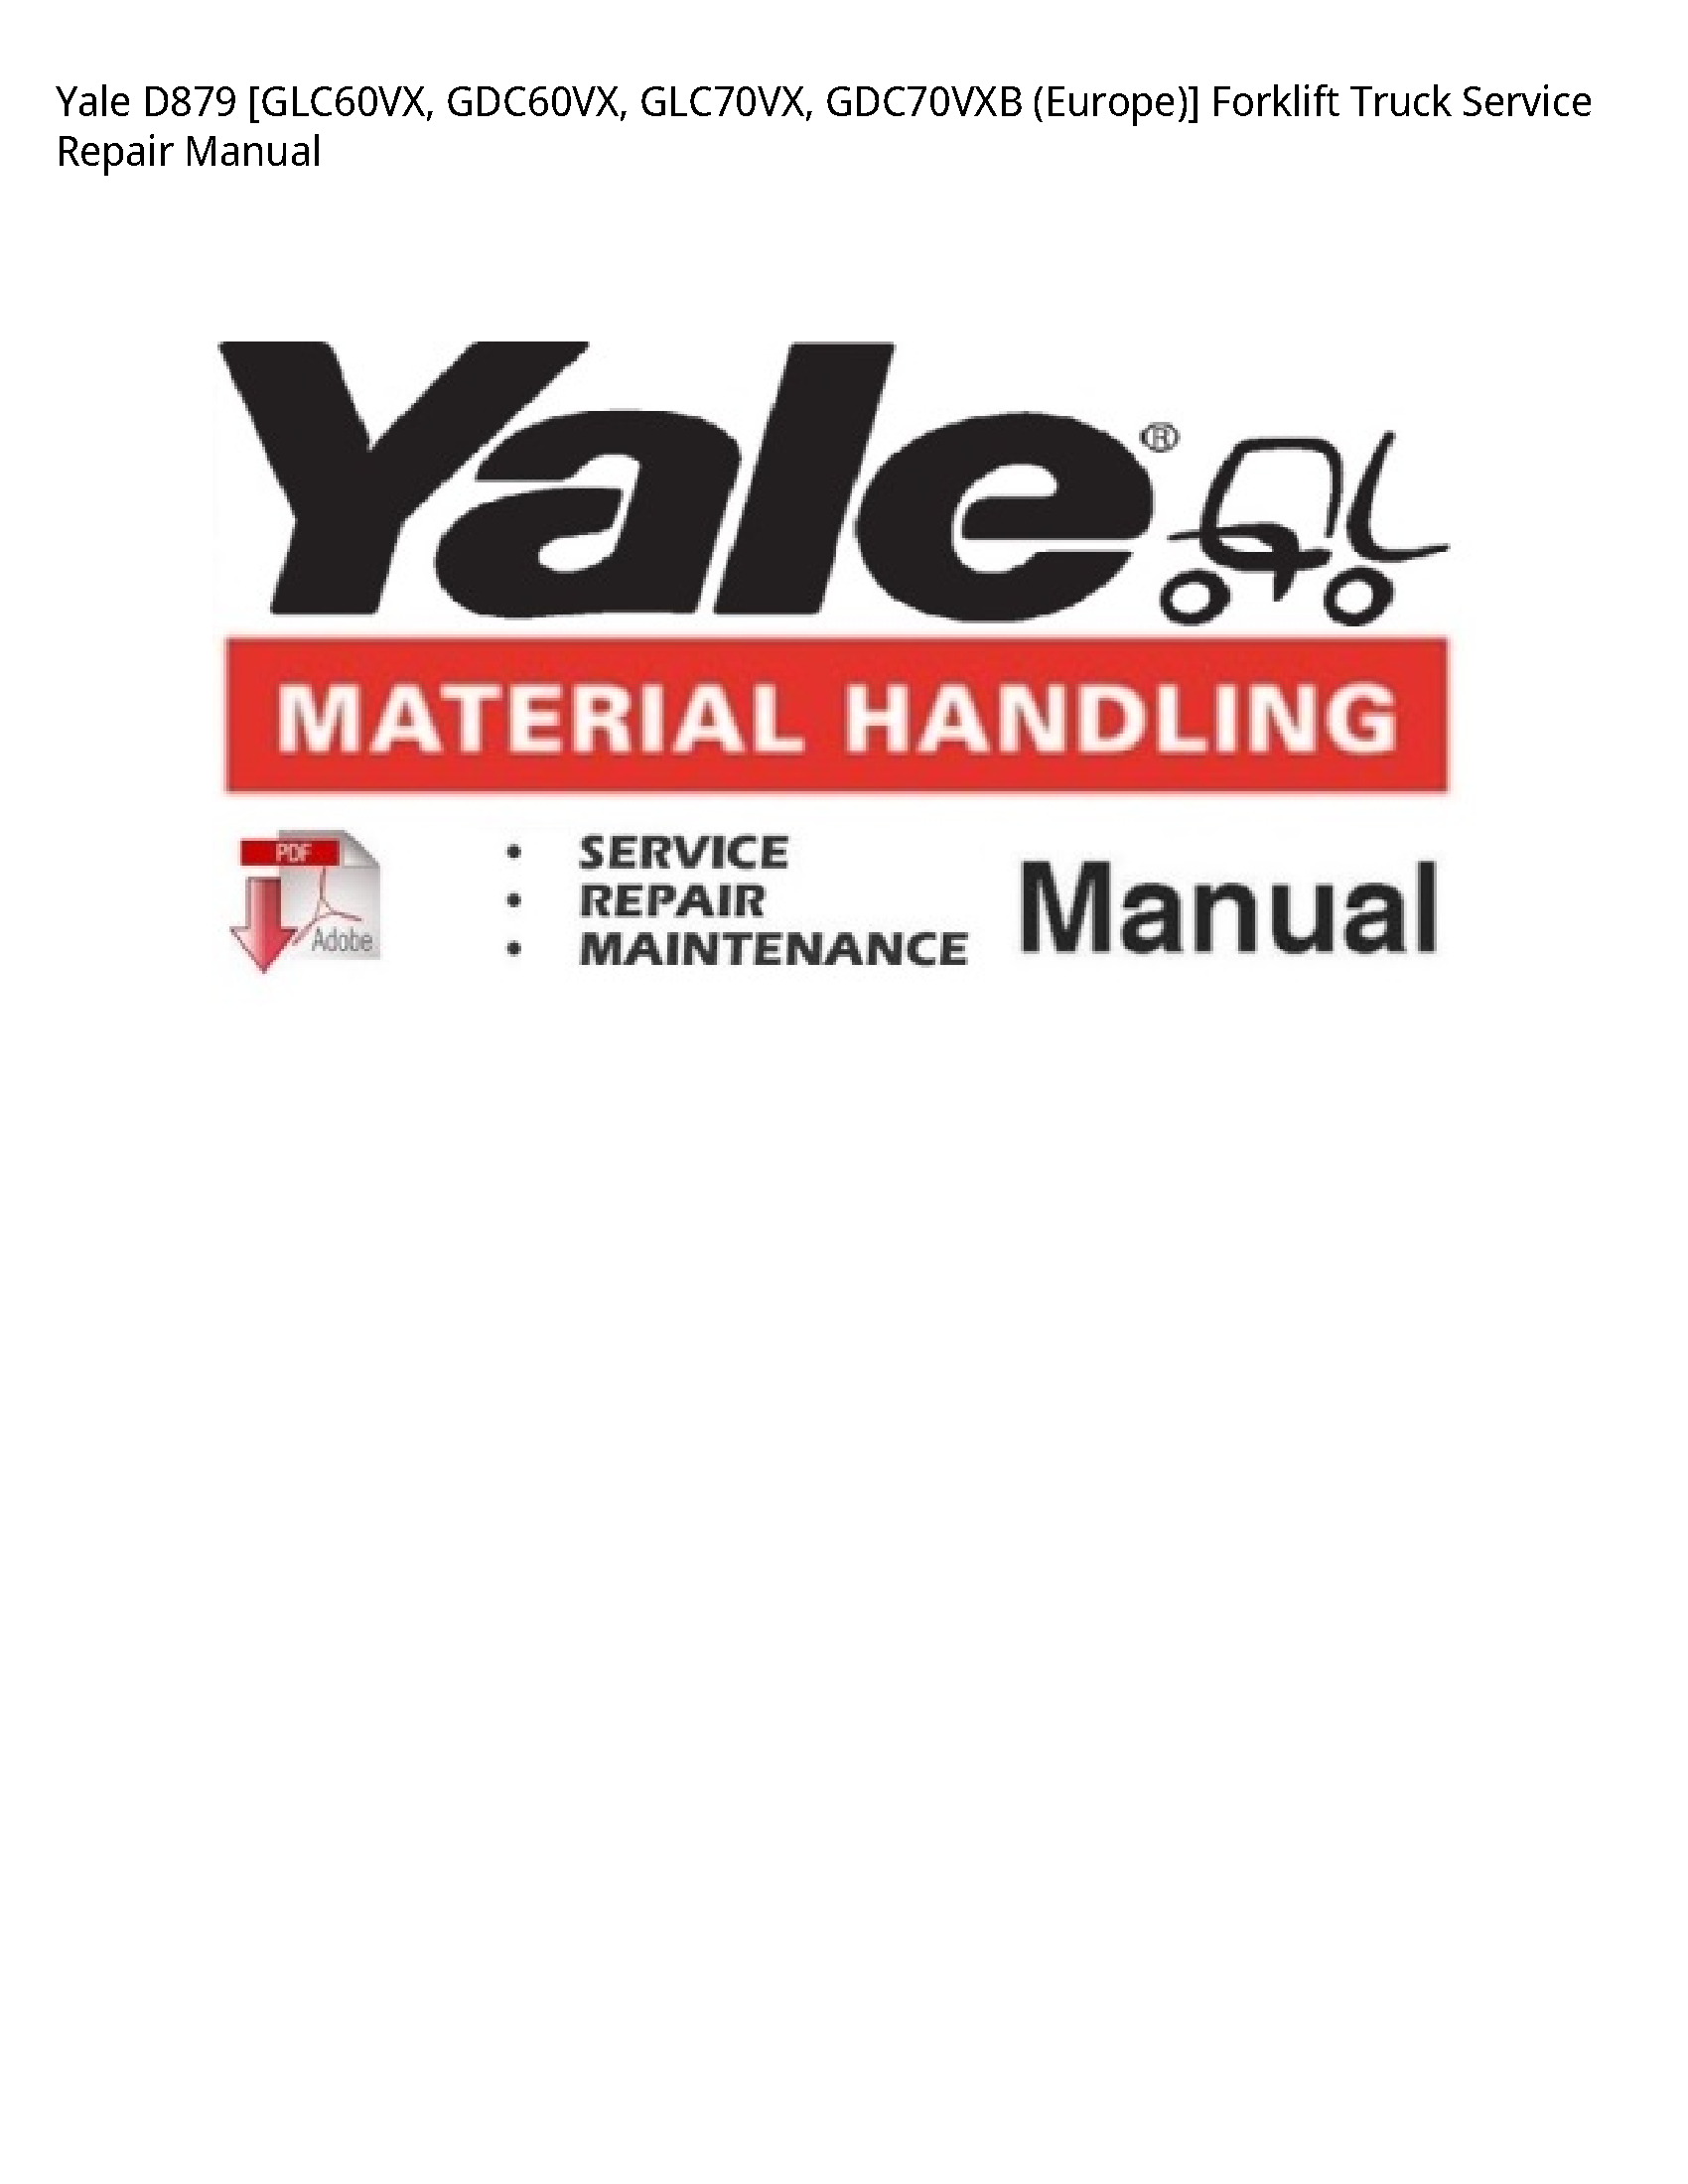 Yale D879 (Europe)] Forklift Truck manual